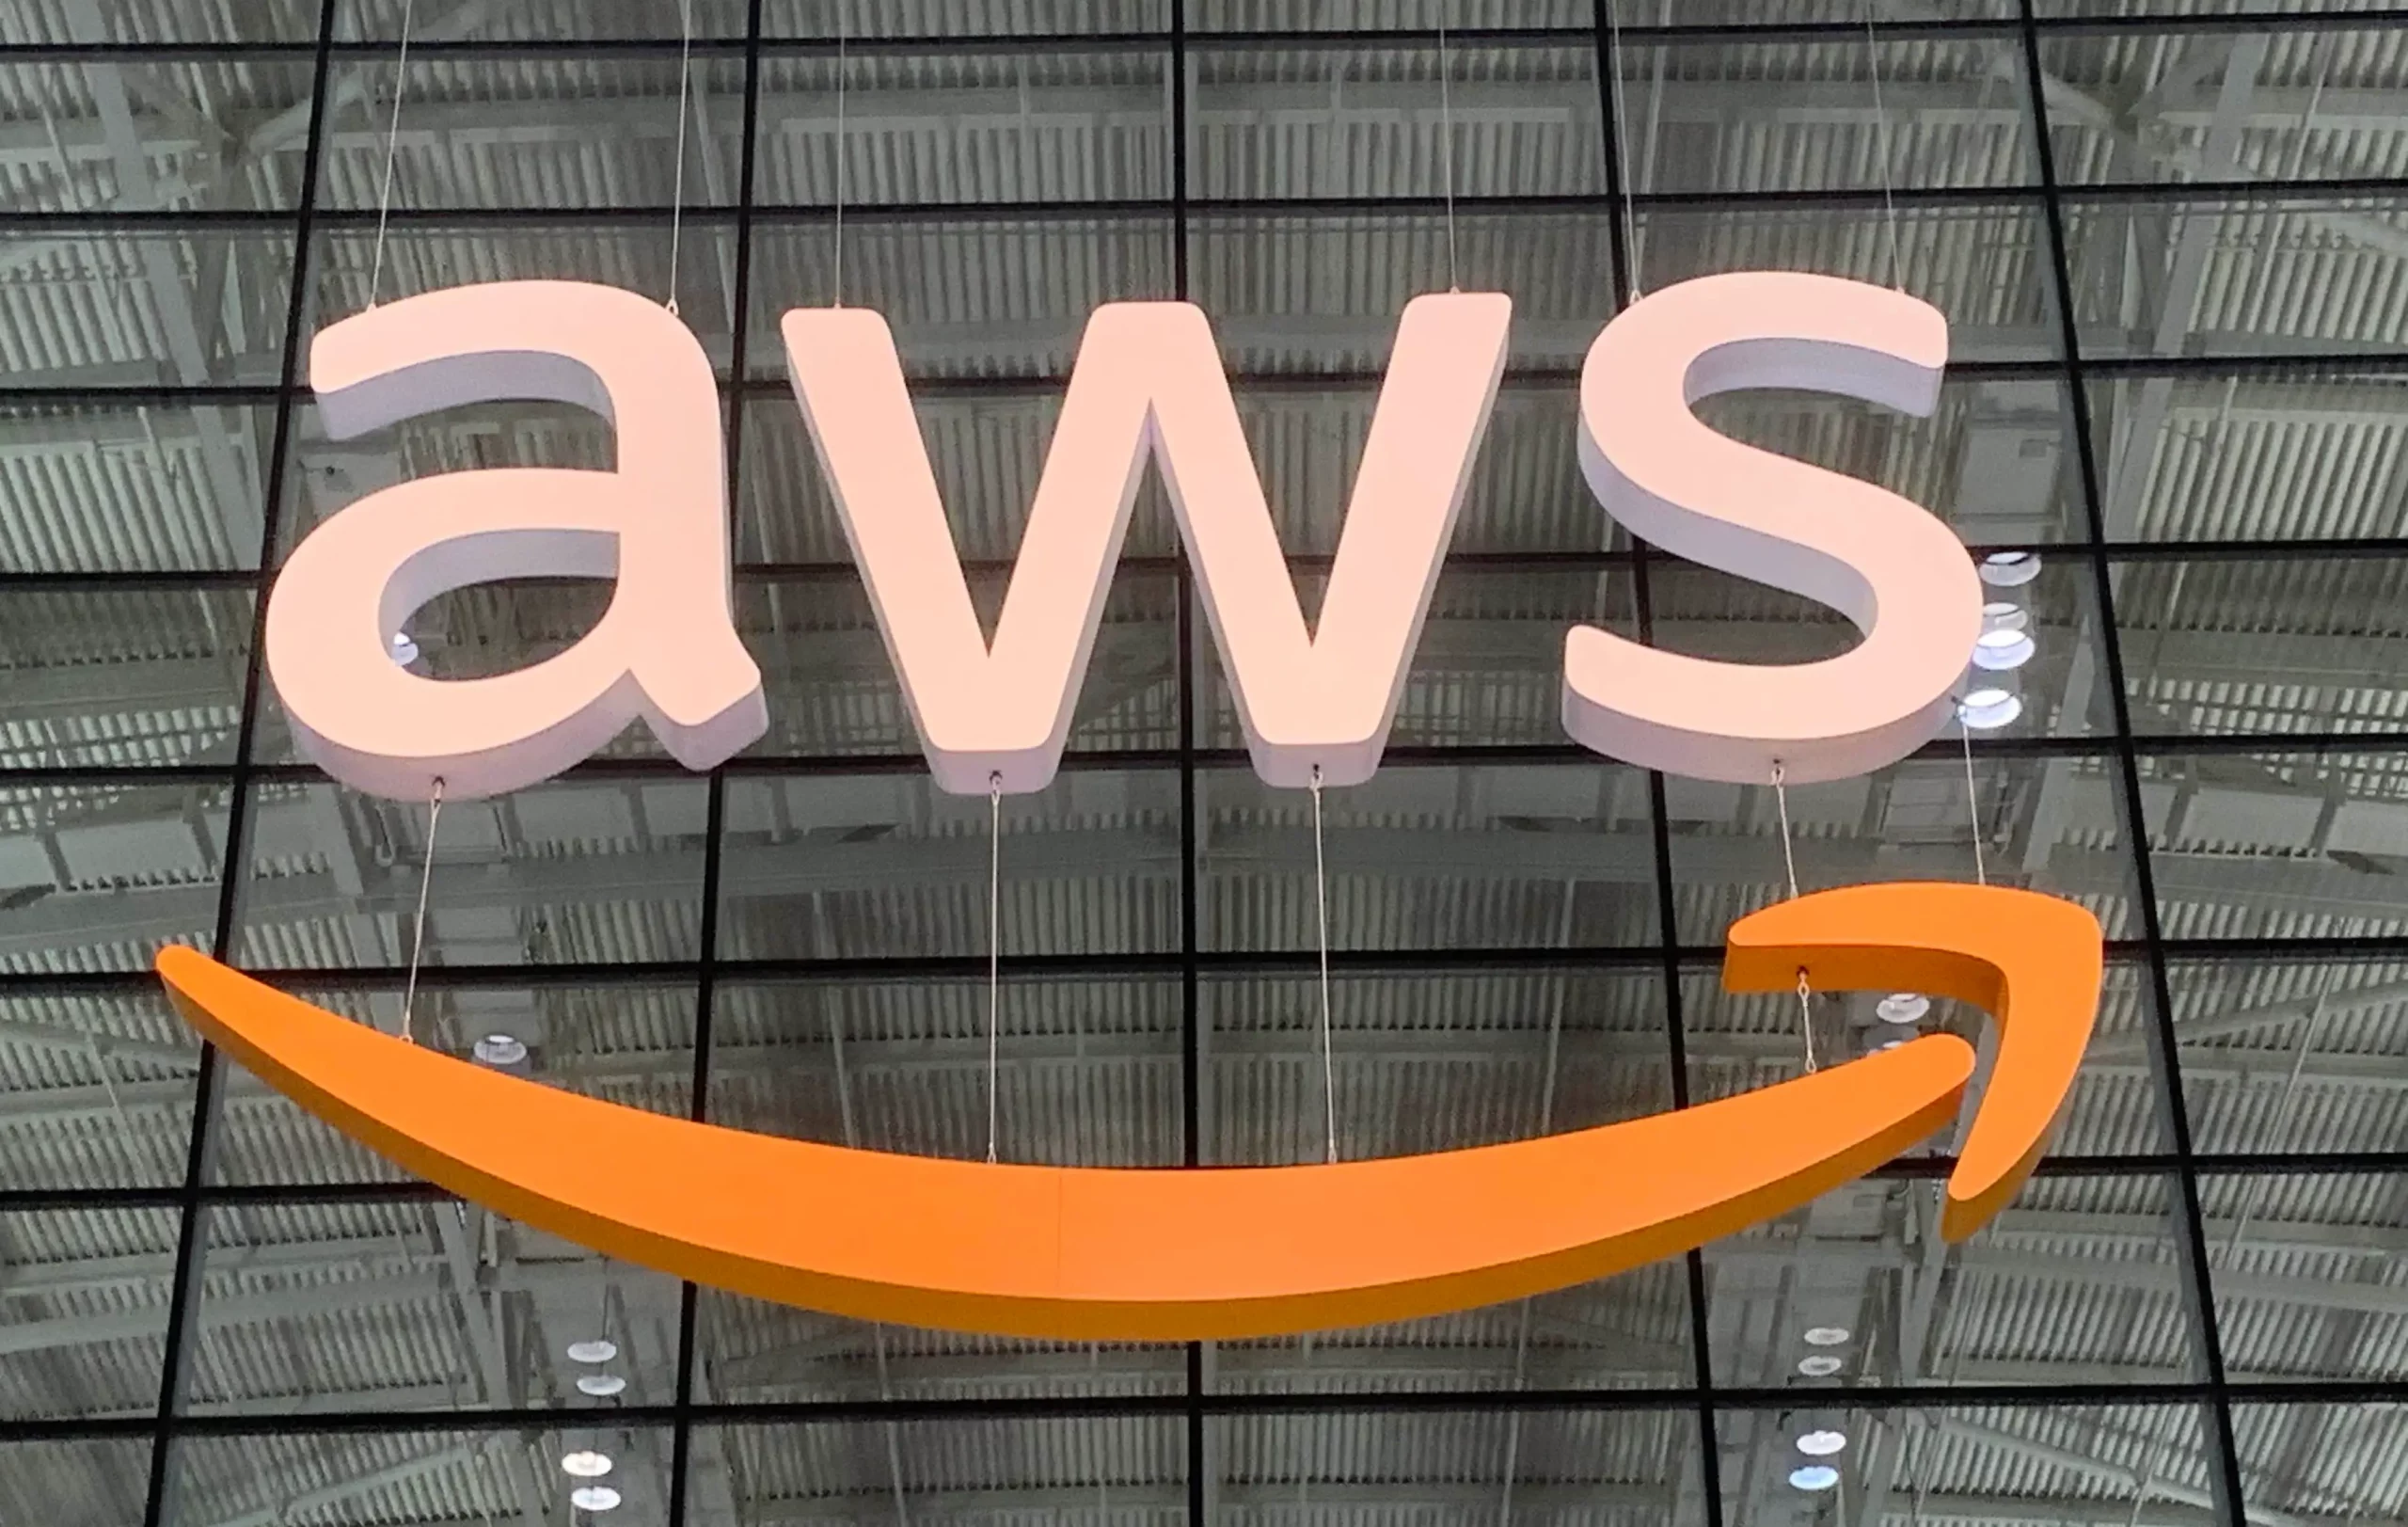 The "Essential AWS Technical Knowledge Development Course" provides participants with a comprehensive understanding of Amazon Web Services (AWS), one of the leading cloud computing platforms globally